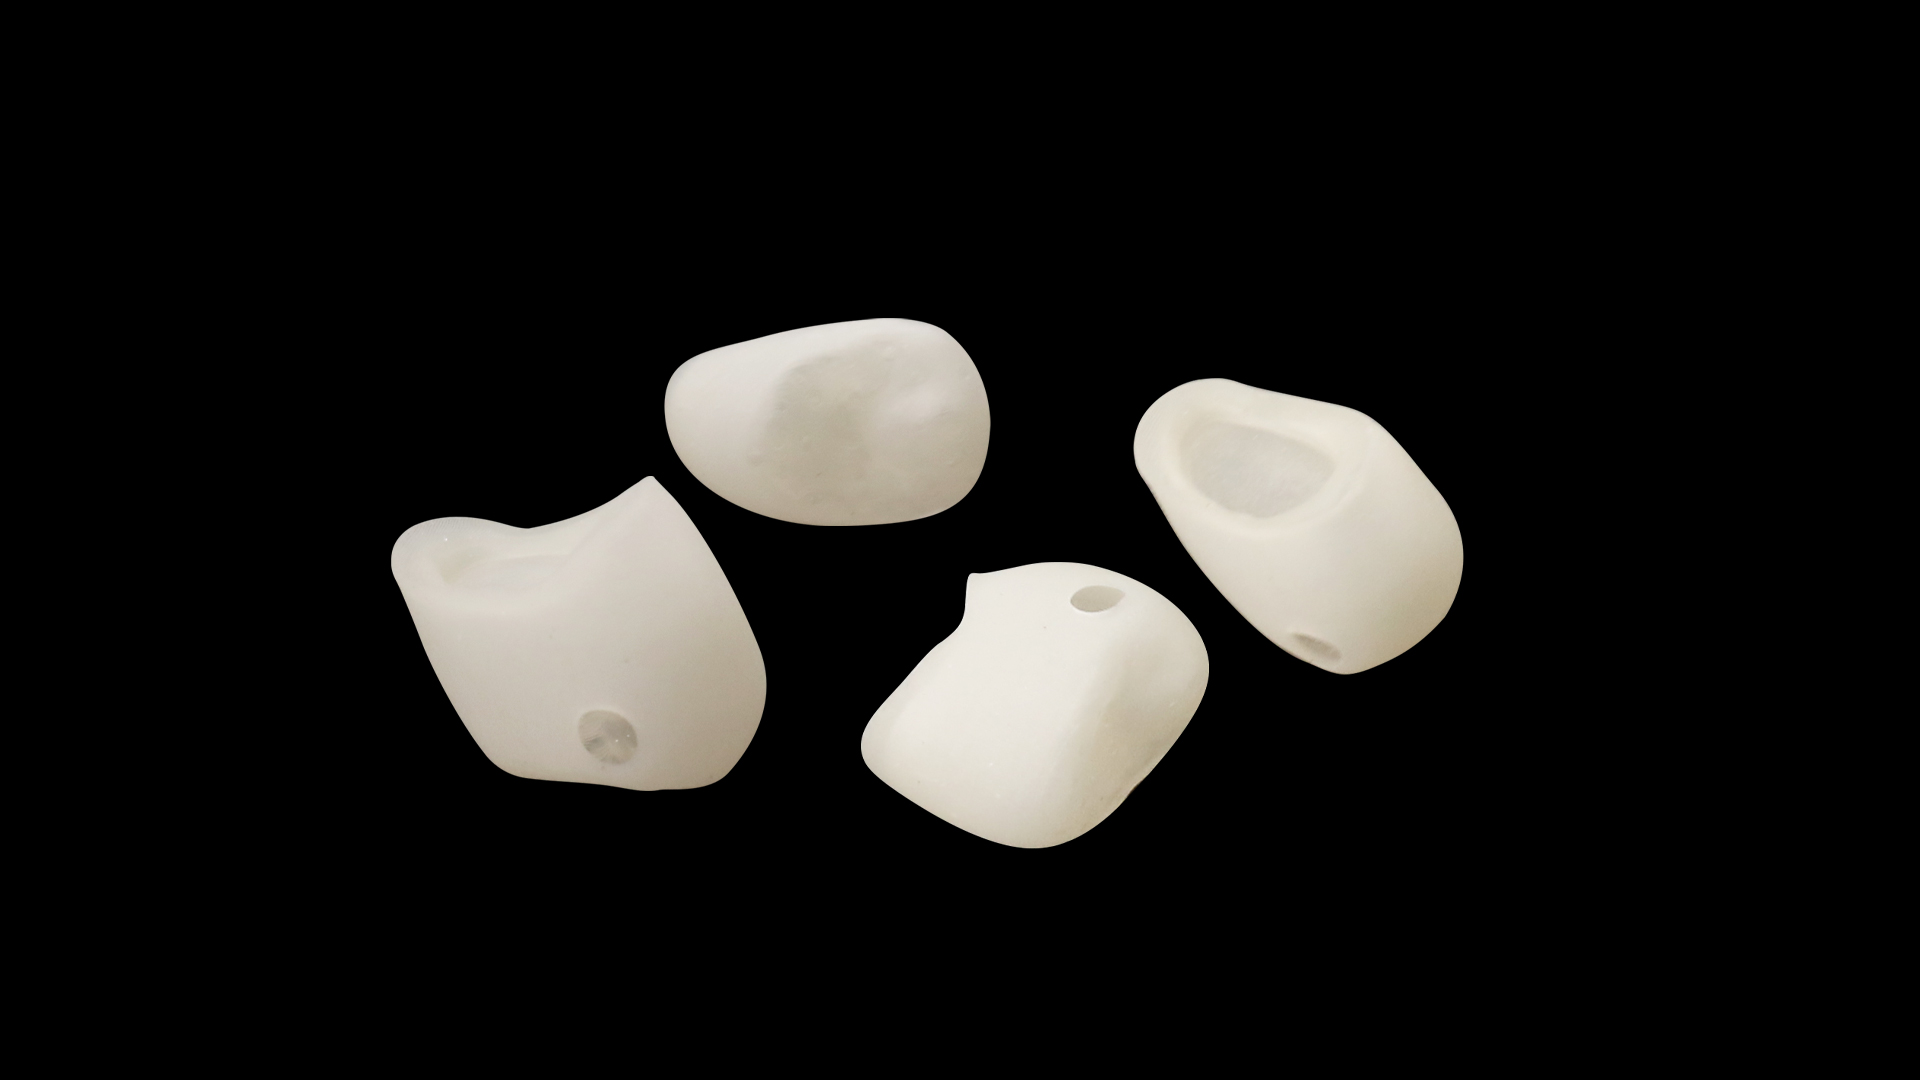 What is the difference between 3D printed crowns and bridges and normal dental crowns?